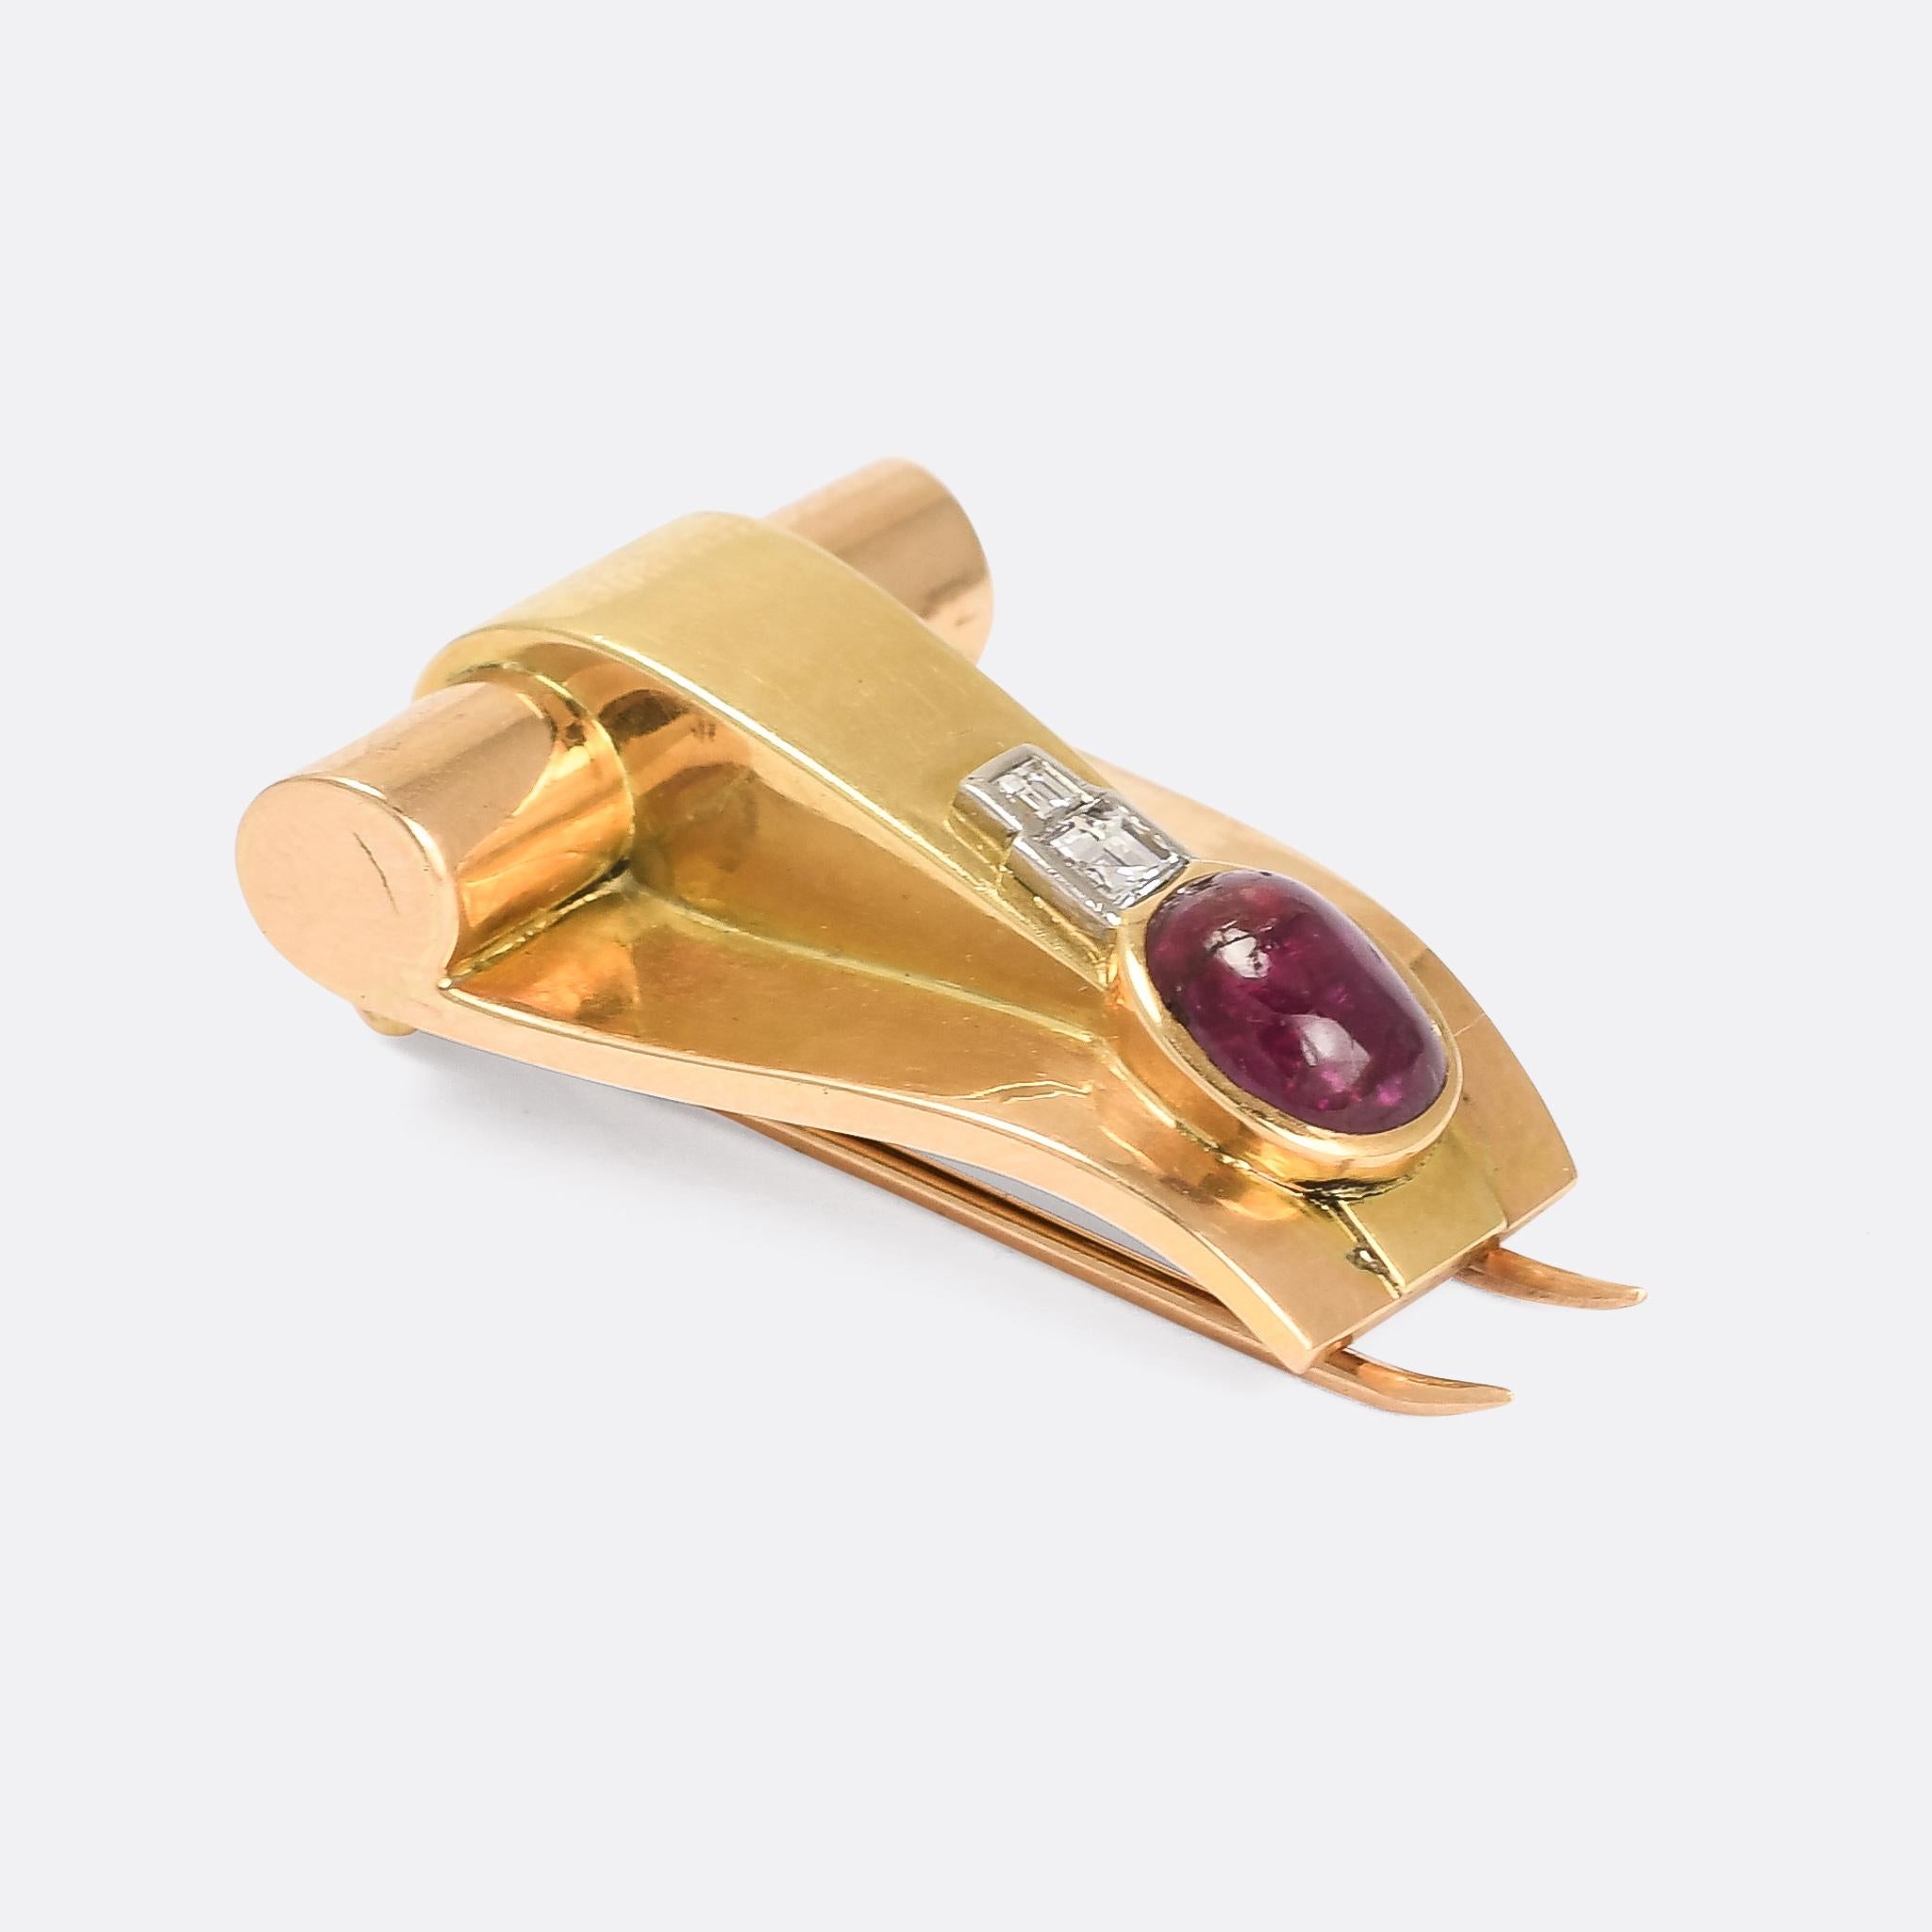 A striking Art Deco brooch set with a natural cabochon ruby and diamond centrepiece. The design is reminscent of a scroll or buckle (I can't quite make up my mind which..) and is very typically Deco in style. It's crafted in 18 karat gold, with